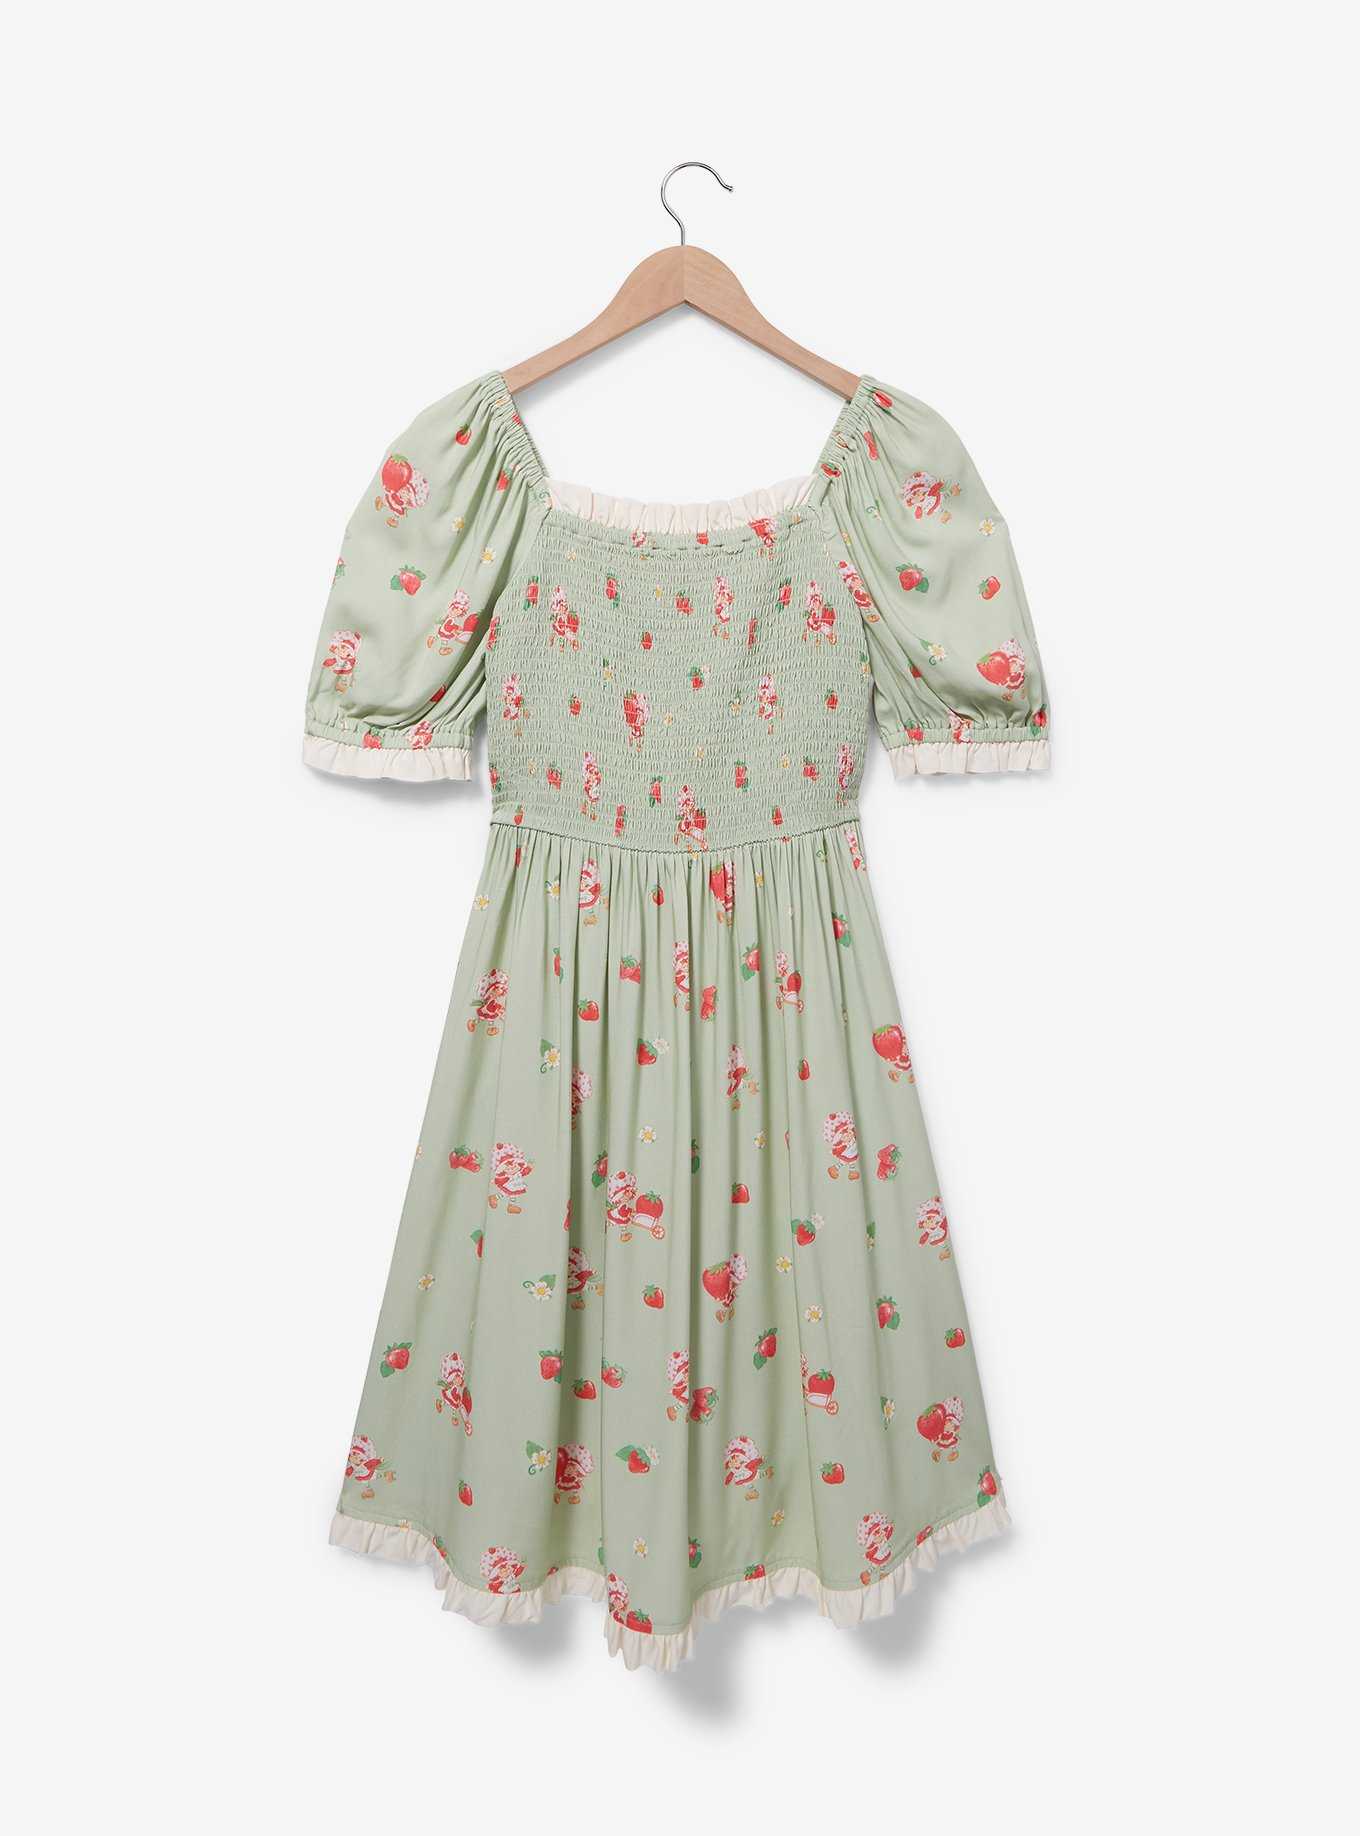 Strawberry Shortcake Allover Print Plus Size Smock Dress - BoxLunch Exclusive, , hi-res